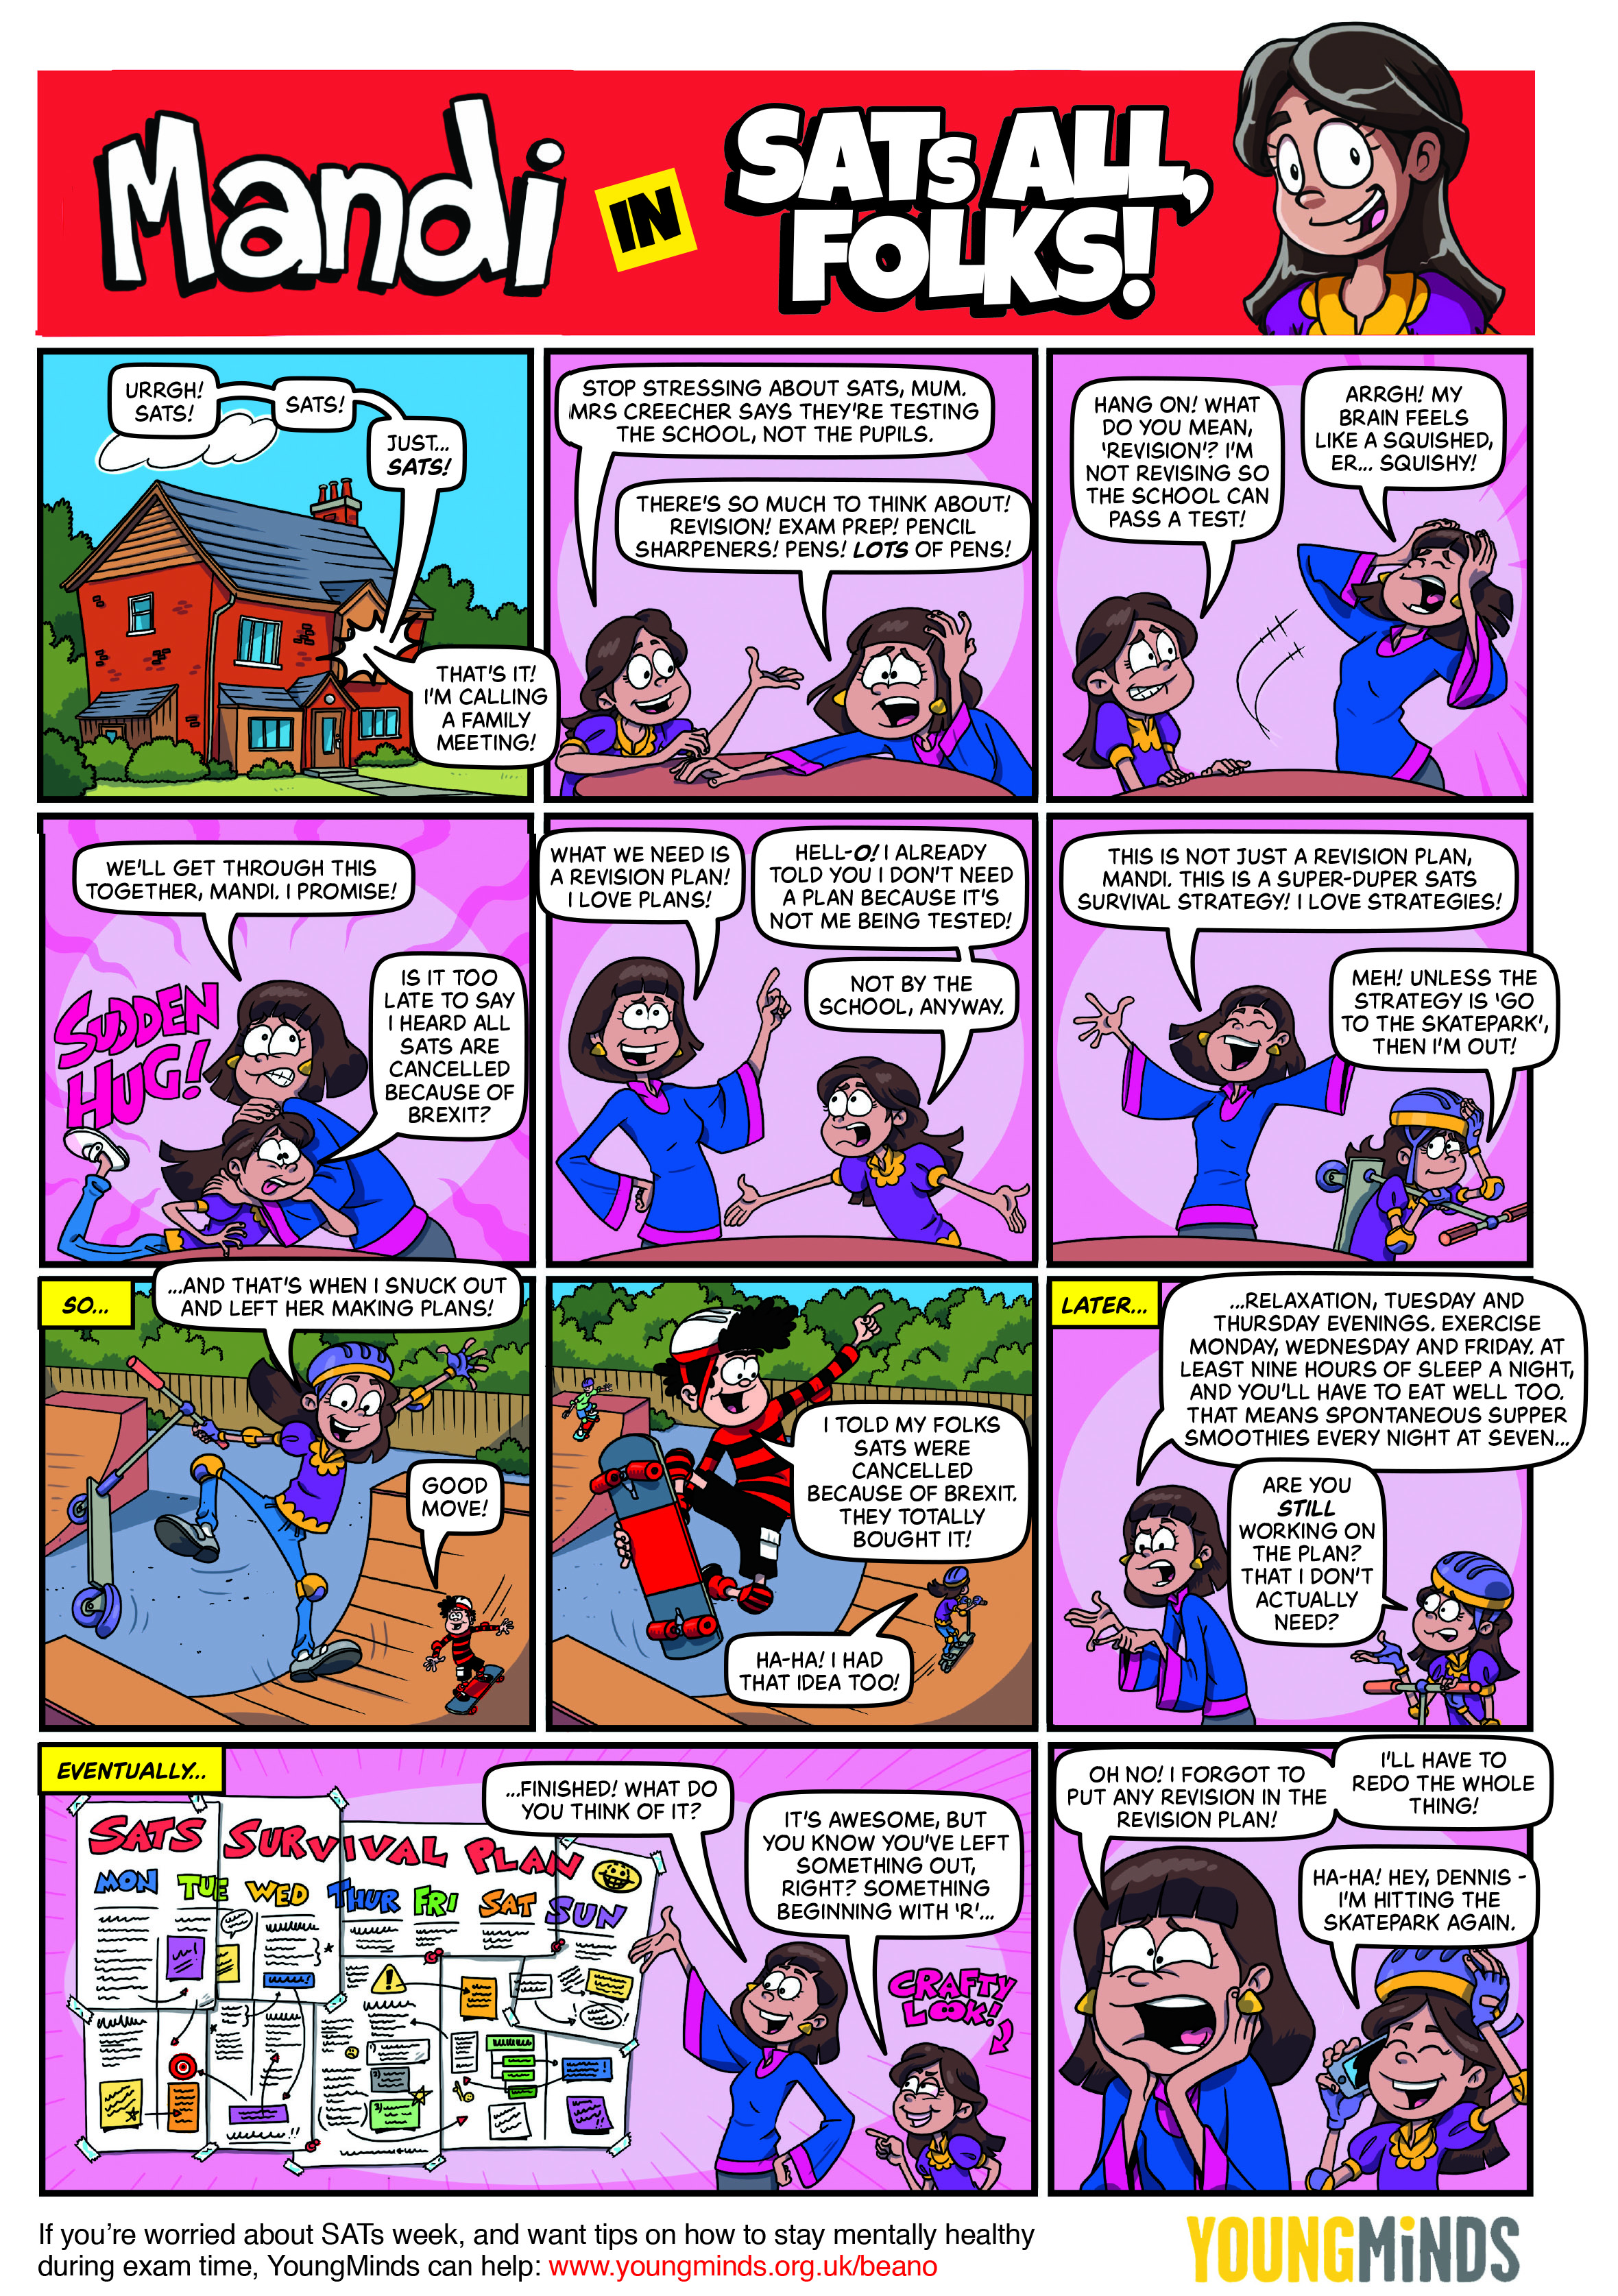 Beano and YoungMinds teamed up to craete SATs All, Folks! - a comic strip about how to avoid SATs worry!